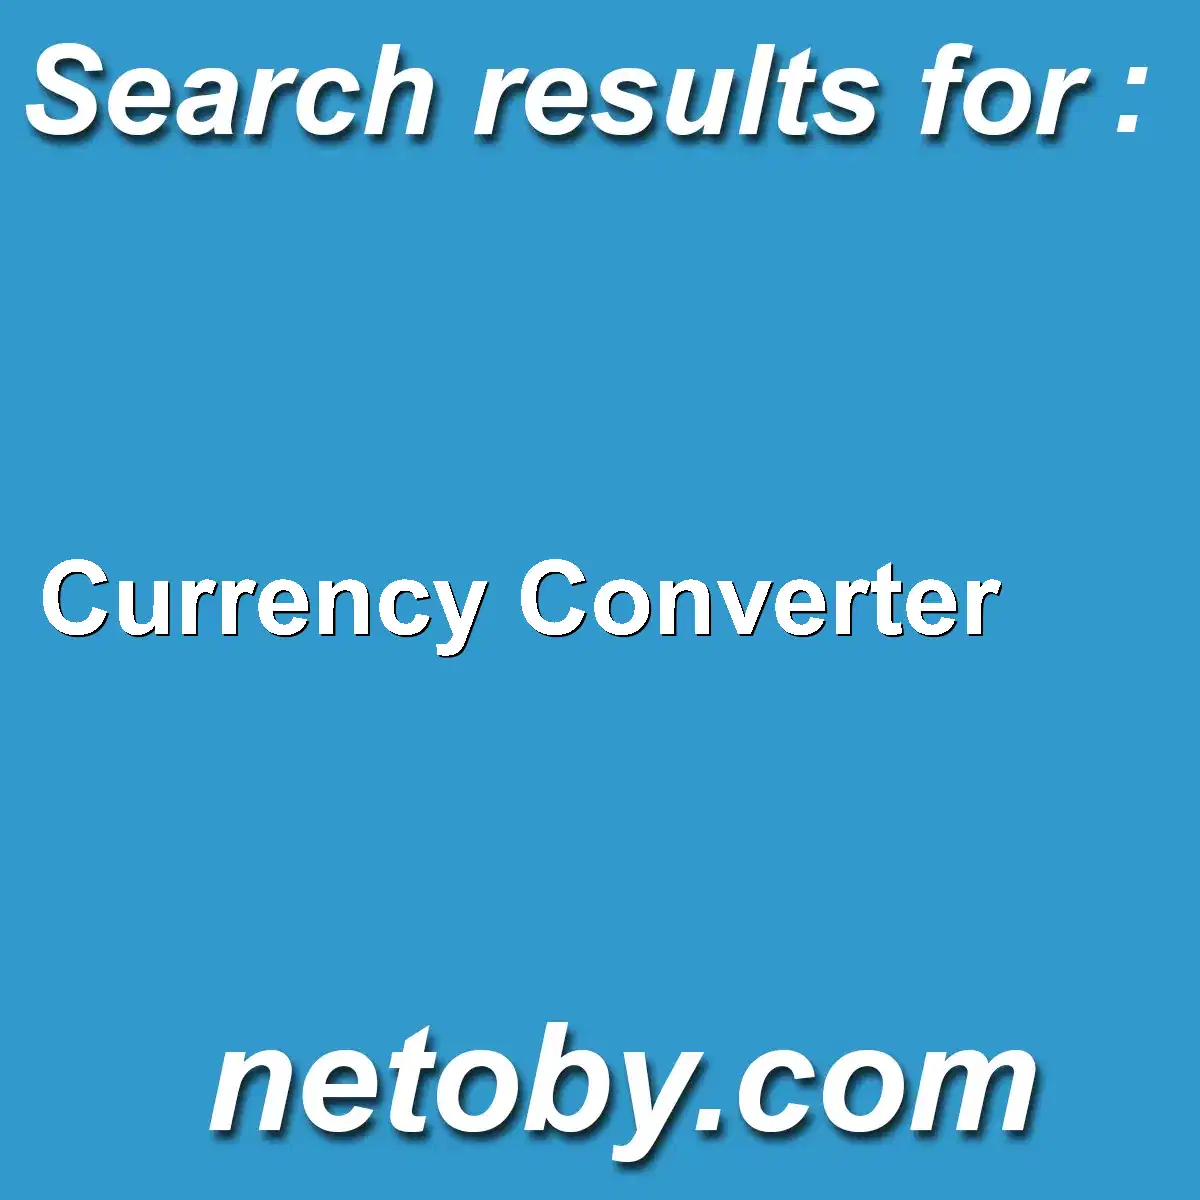 ﻿Currency Converter